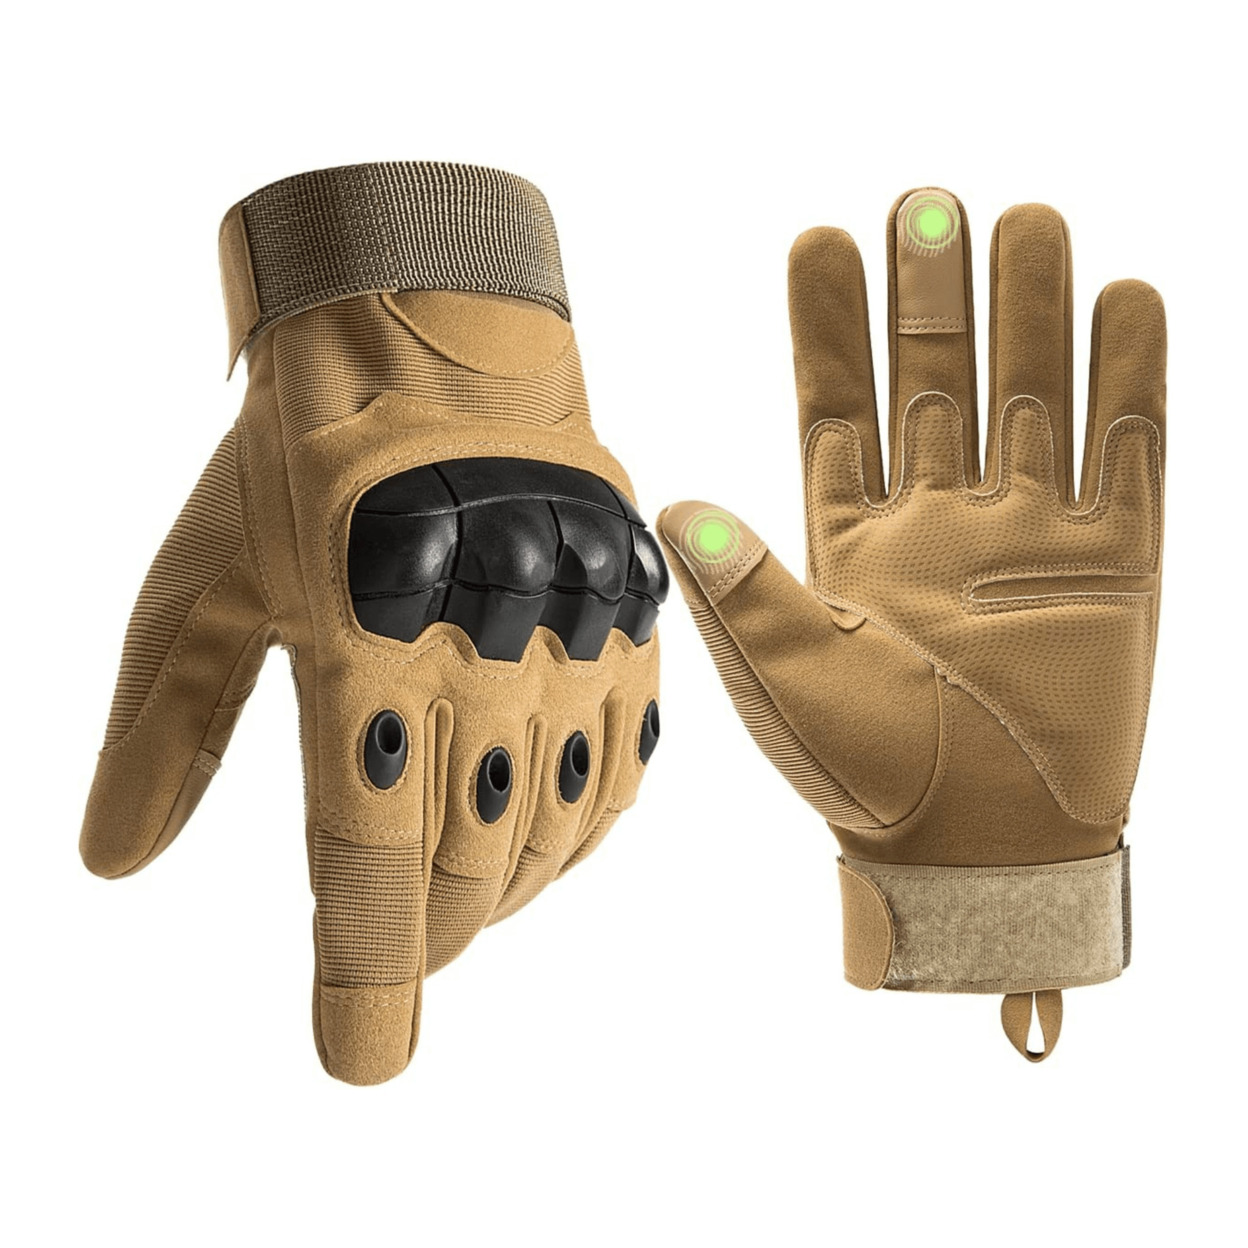 Tactical Military Airsoft Gloves For Outdoor Sports, Paintball, And Motorcycling With Touchscreen Fingertip Capability - Green, X-Large